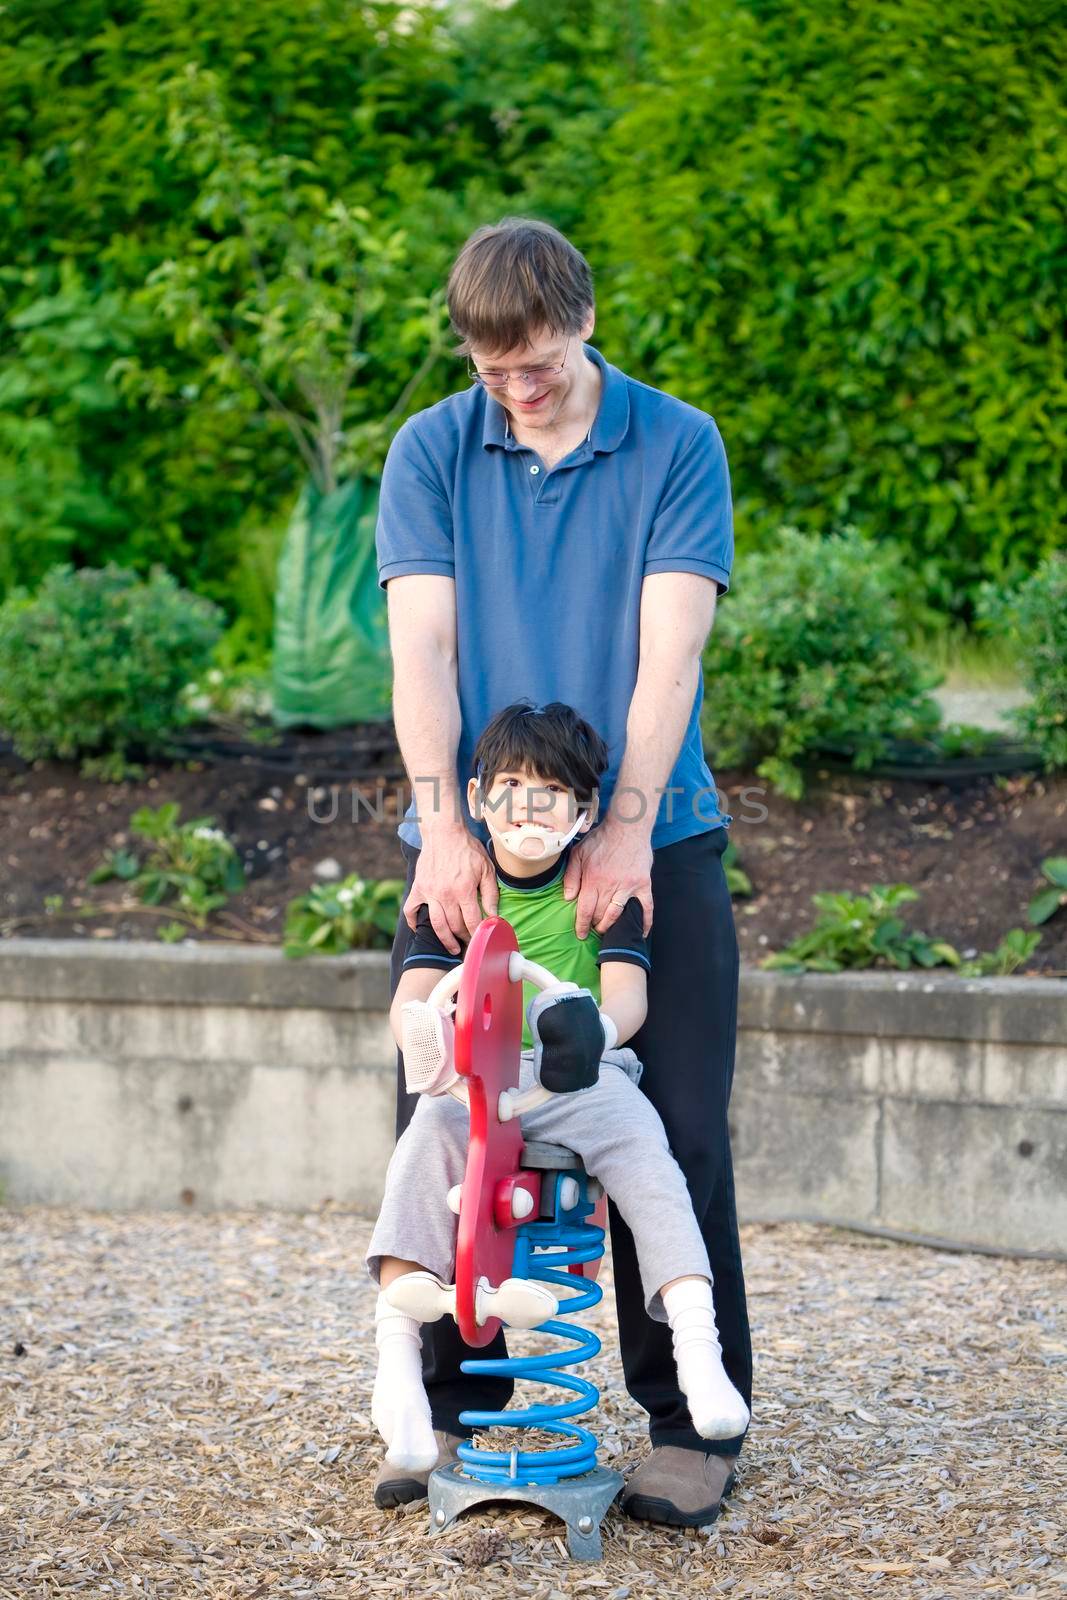 Father helping disabled son play at playground by jarenwicklund